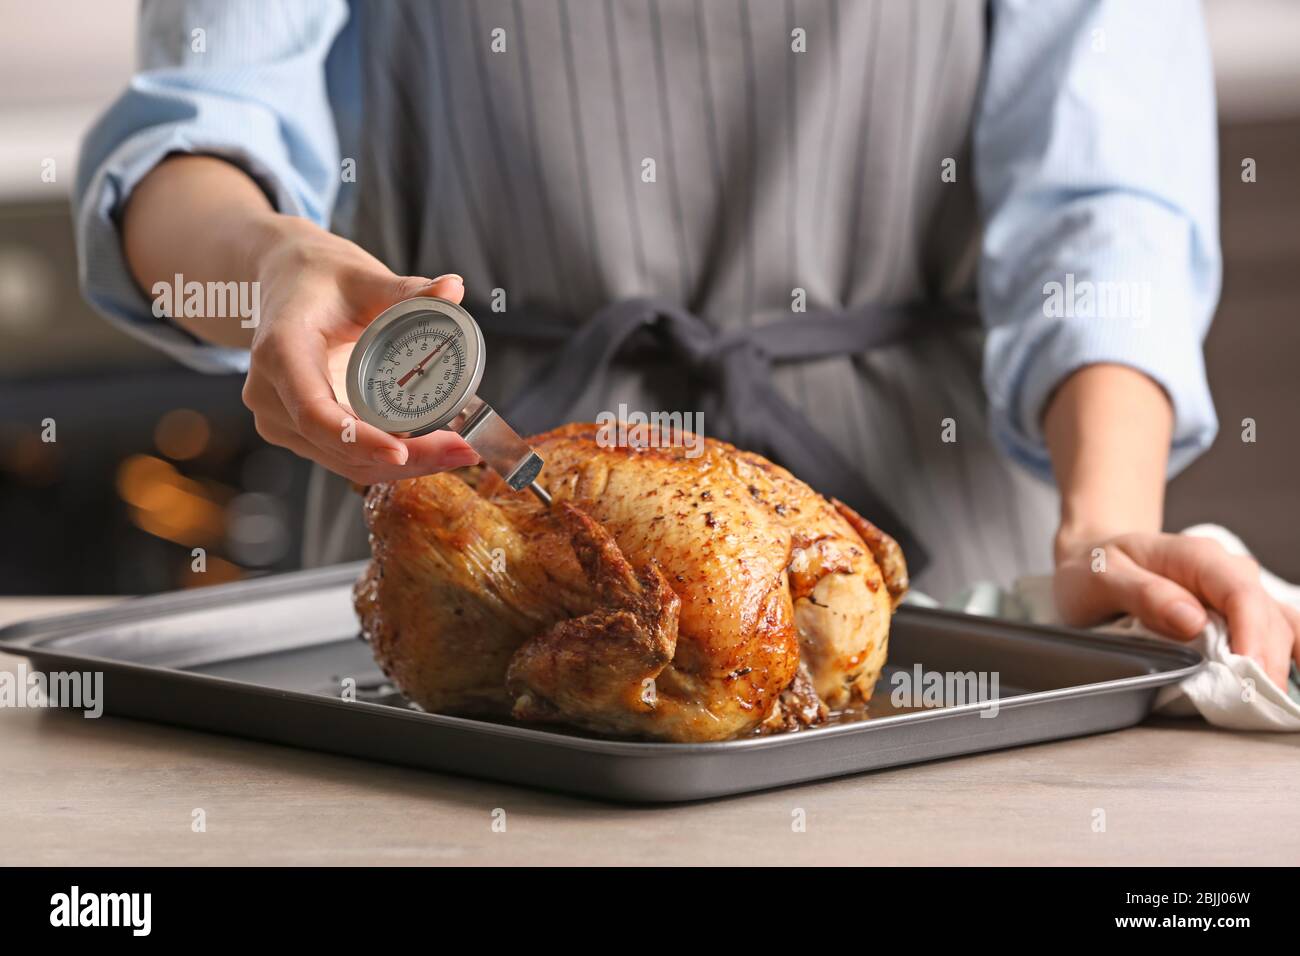 https://c8.alamy.com/comp/2BJJ06W/young-woman-measuring-temperature-of-whole-roasted-turkey-with-meat-thermometer-2BJJ06W.jpg